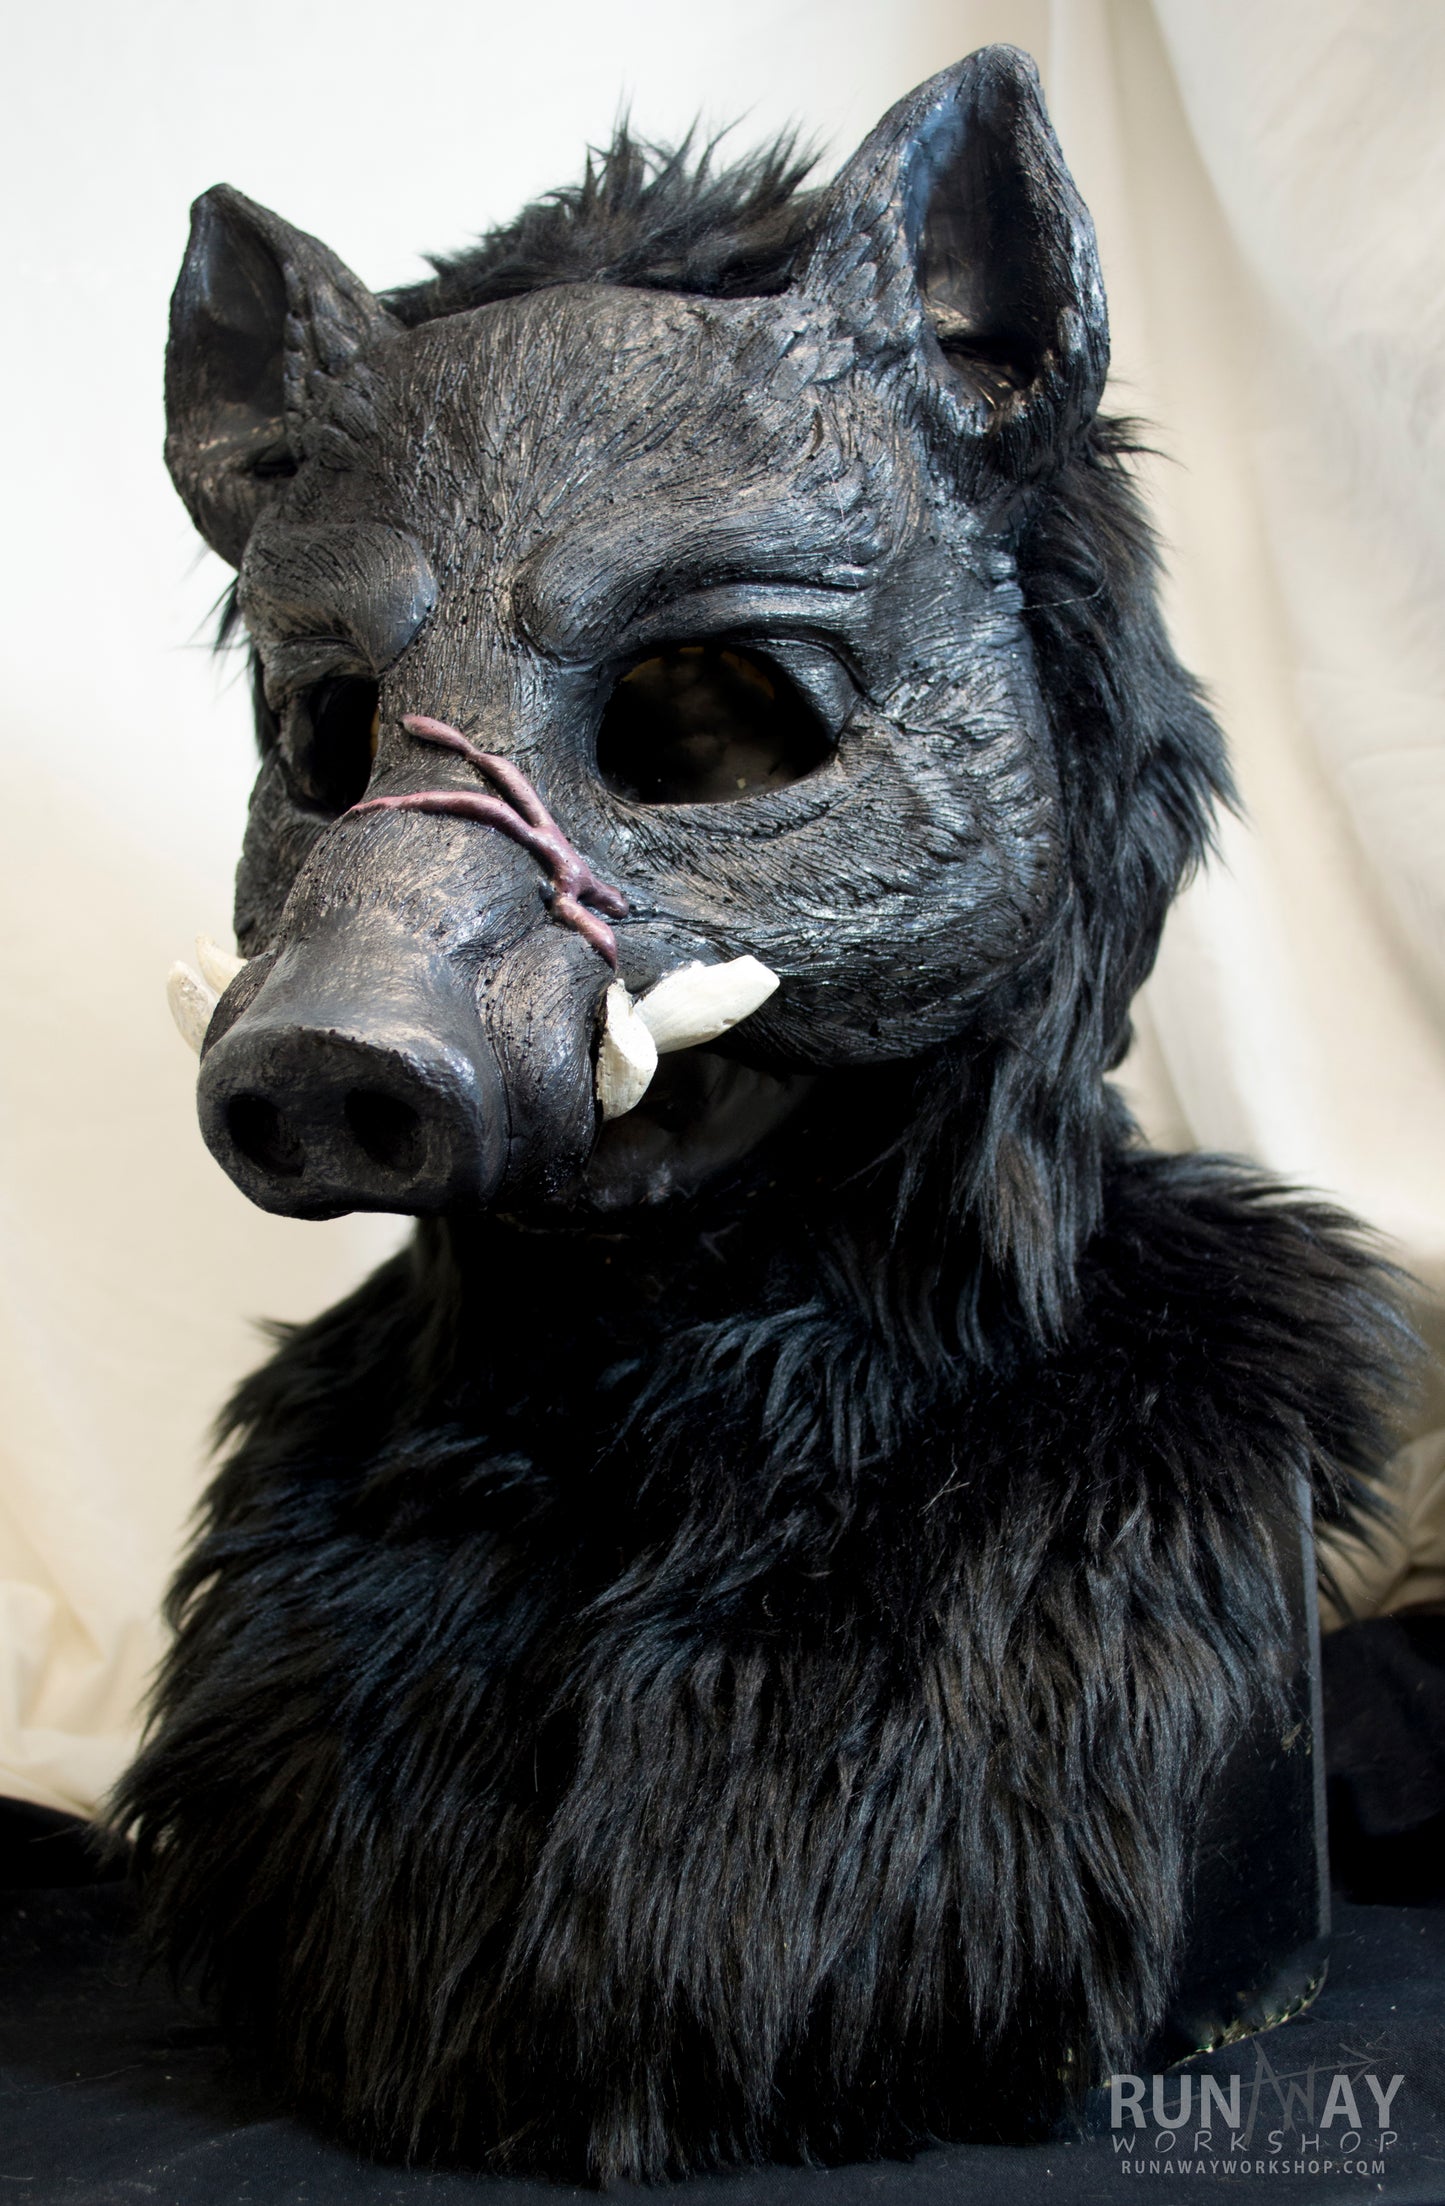 Black Boar, battle scarred, durable hooded mask for LARP, performance and costuming